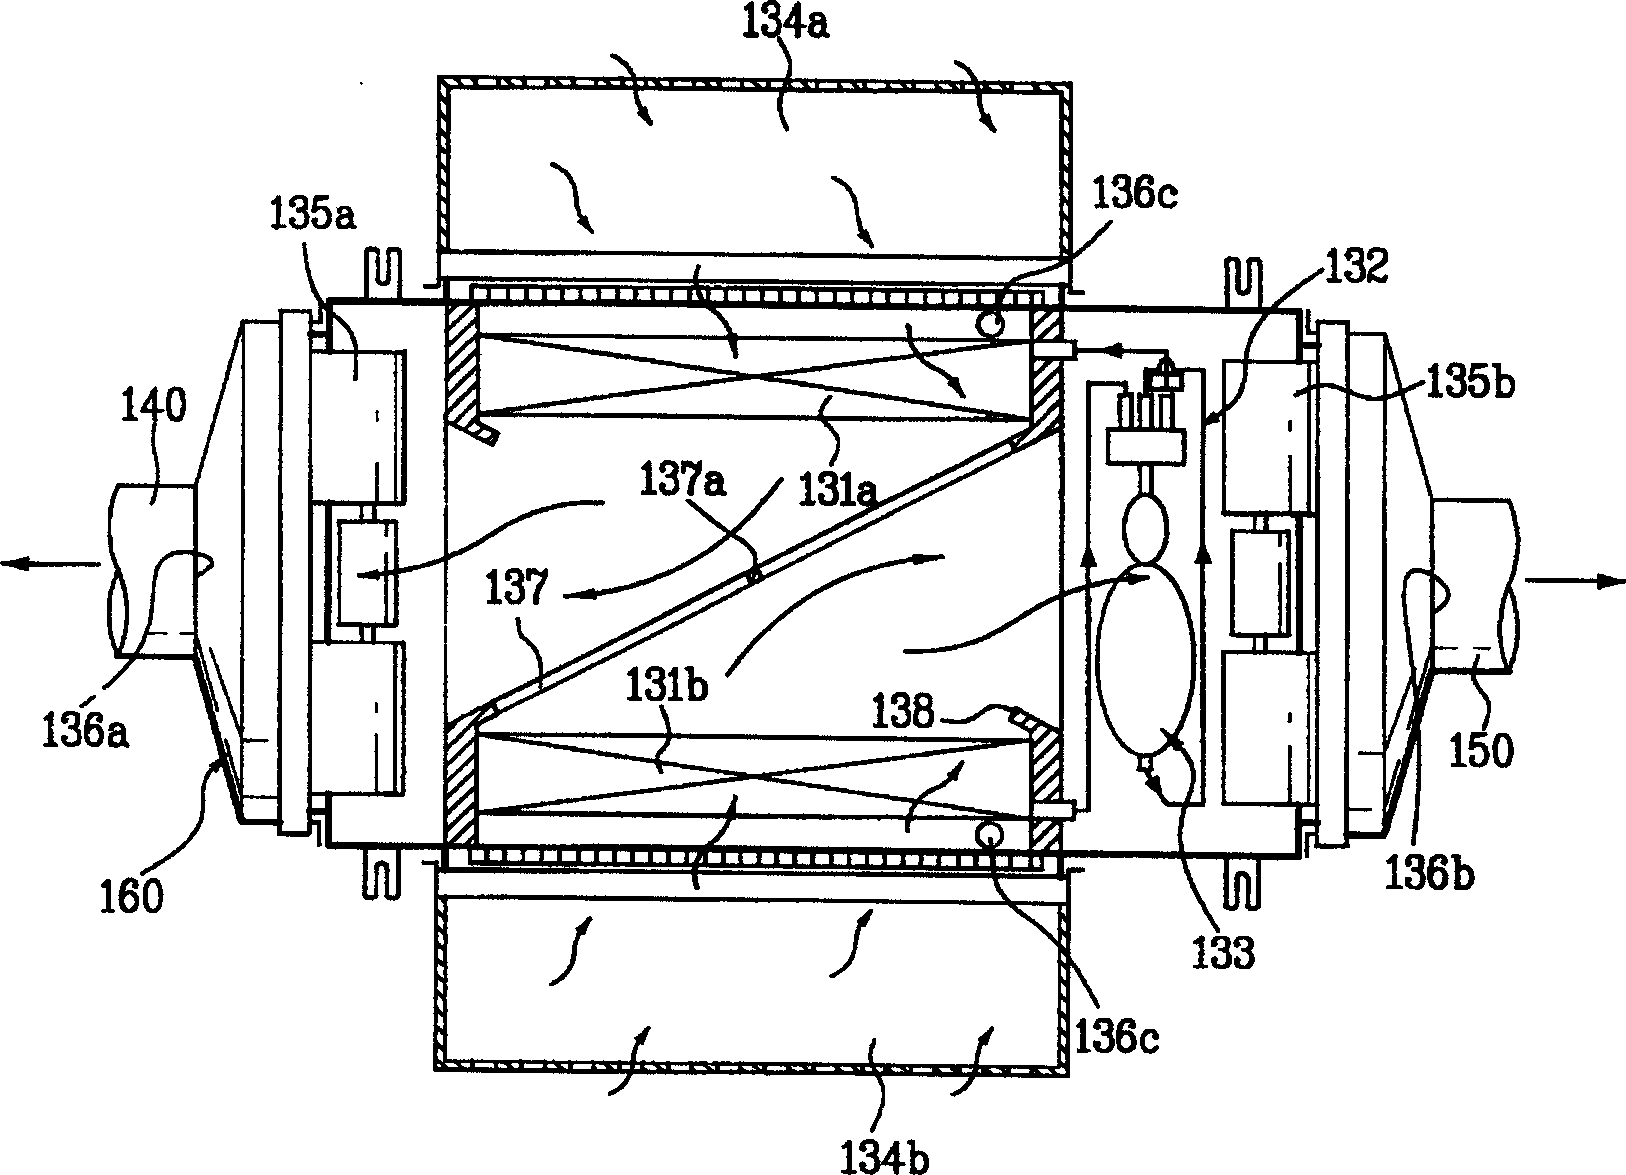 Drying device and washing machine using hydrogen storage alloy as heat source